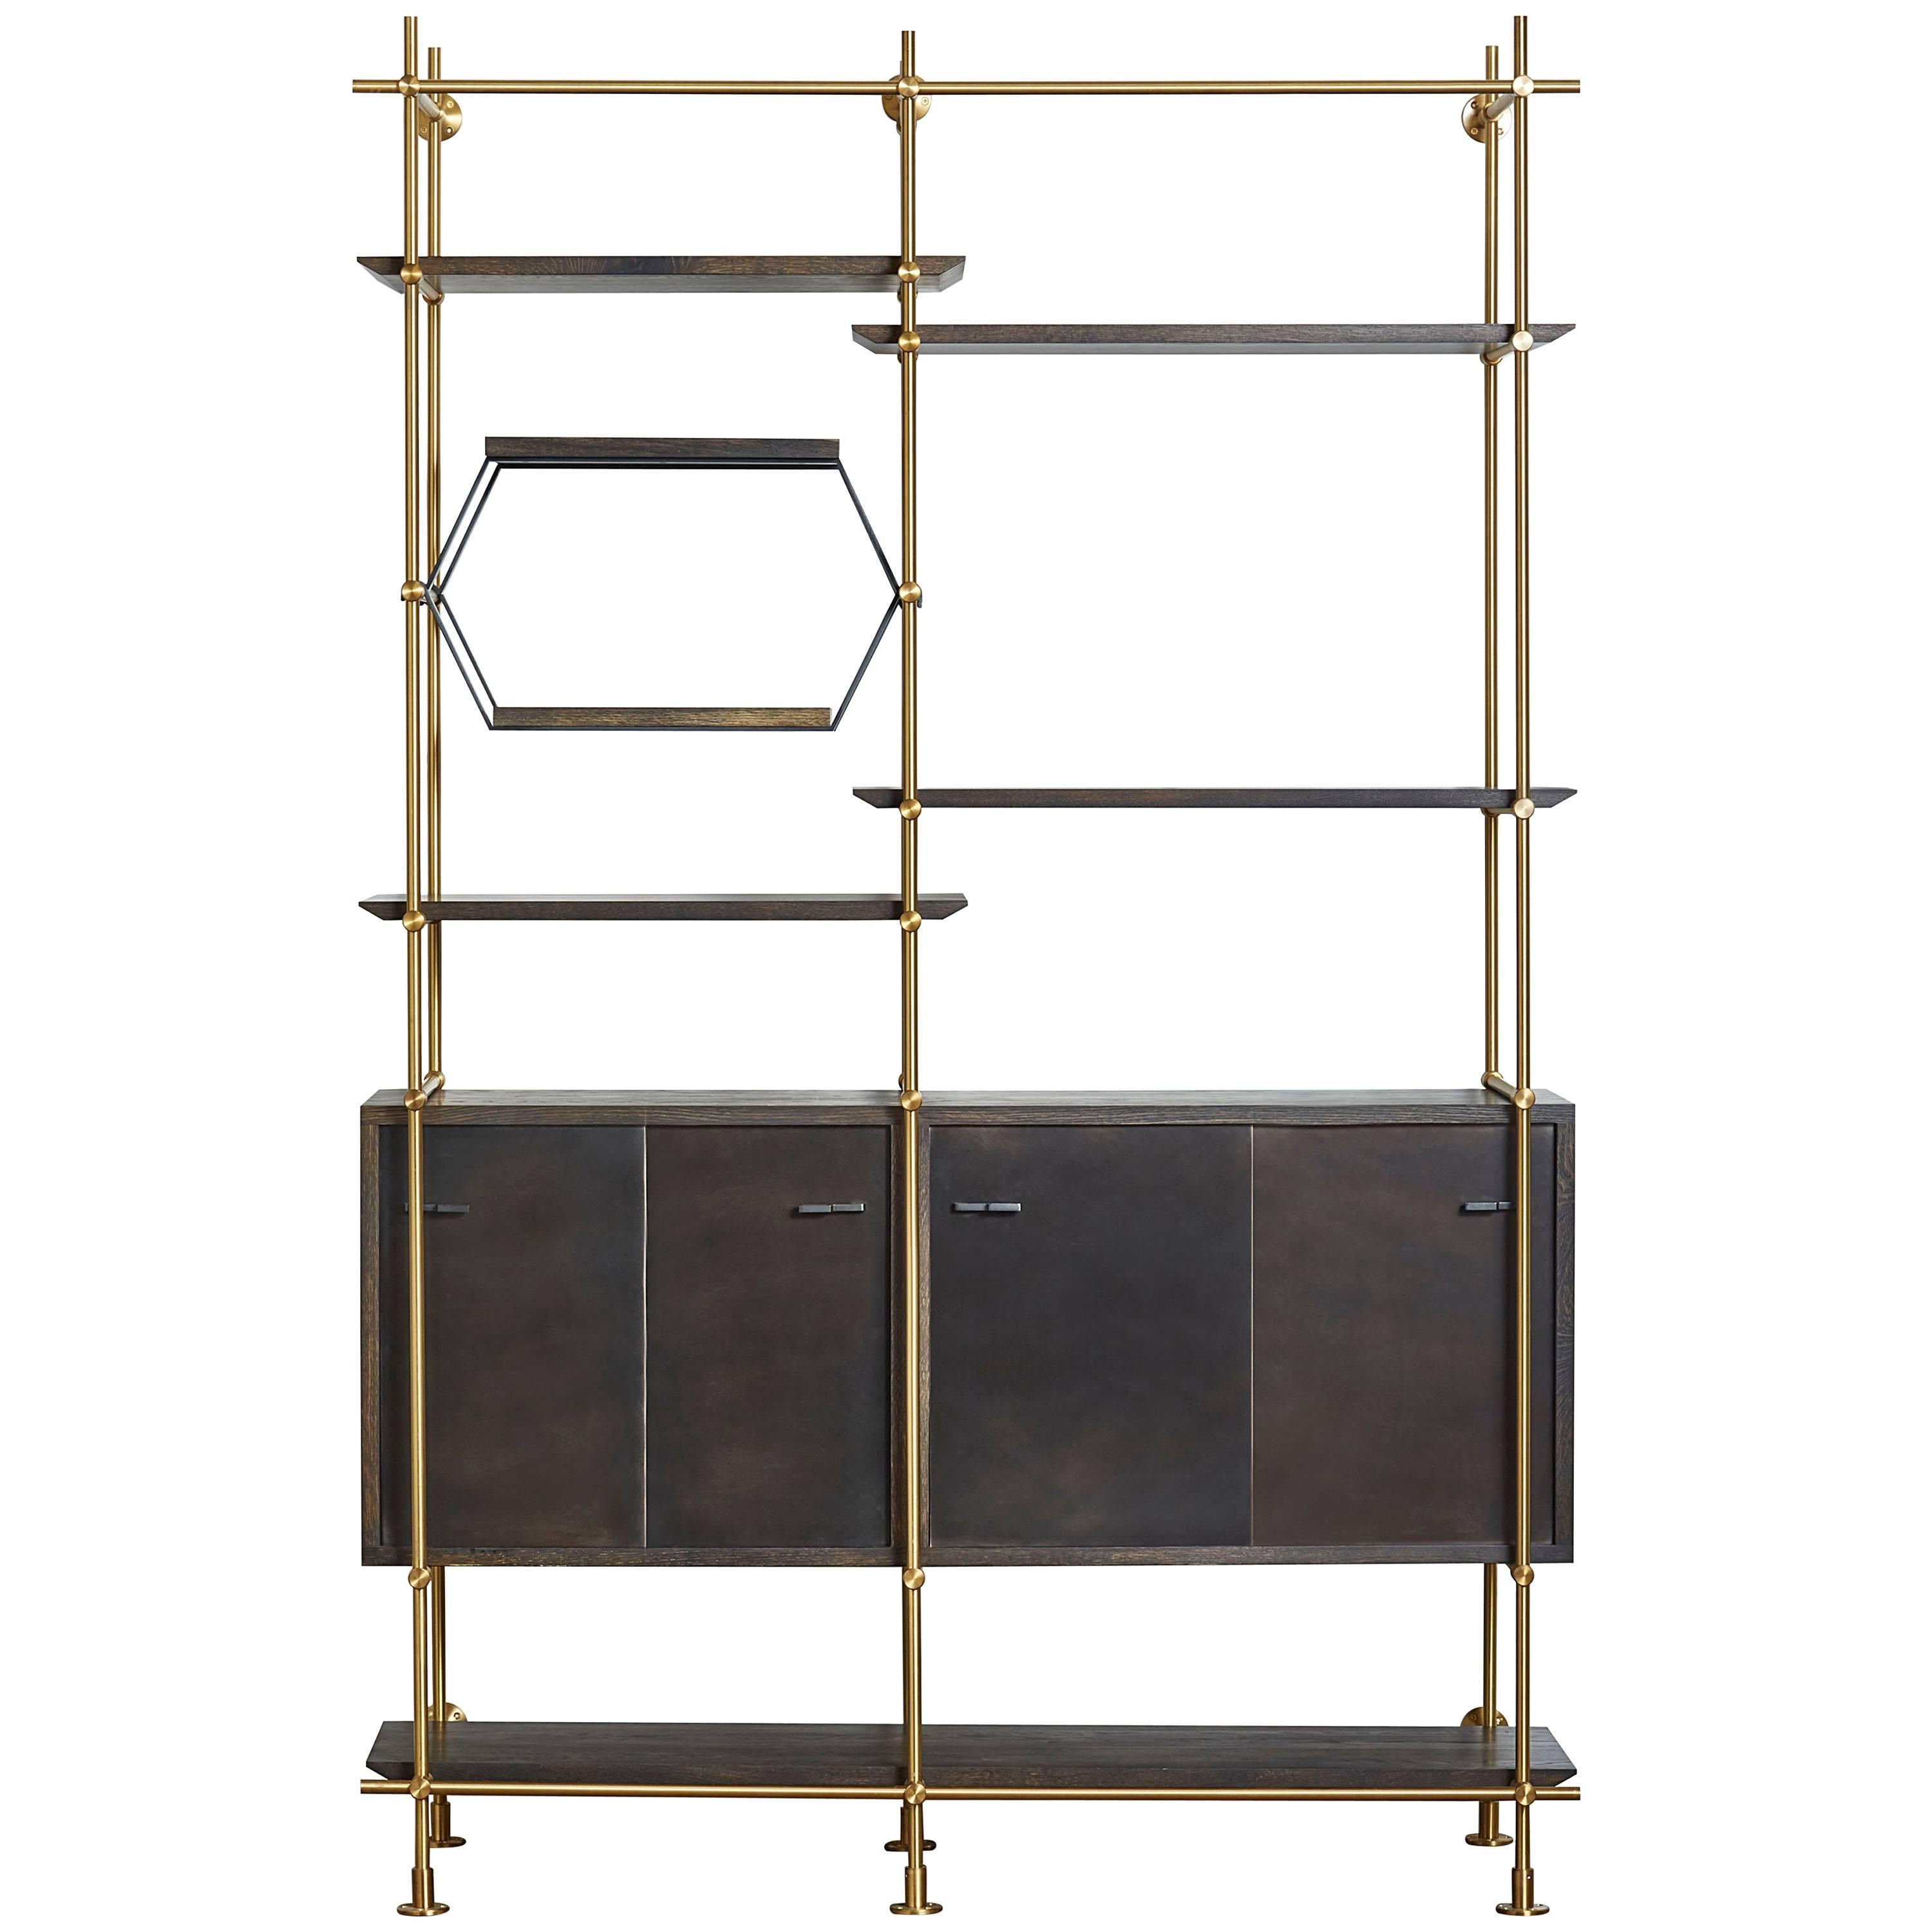 Amuneal's Collector's 2 Bay Shelving Unit